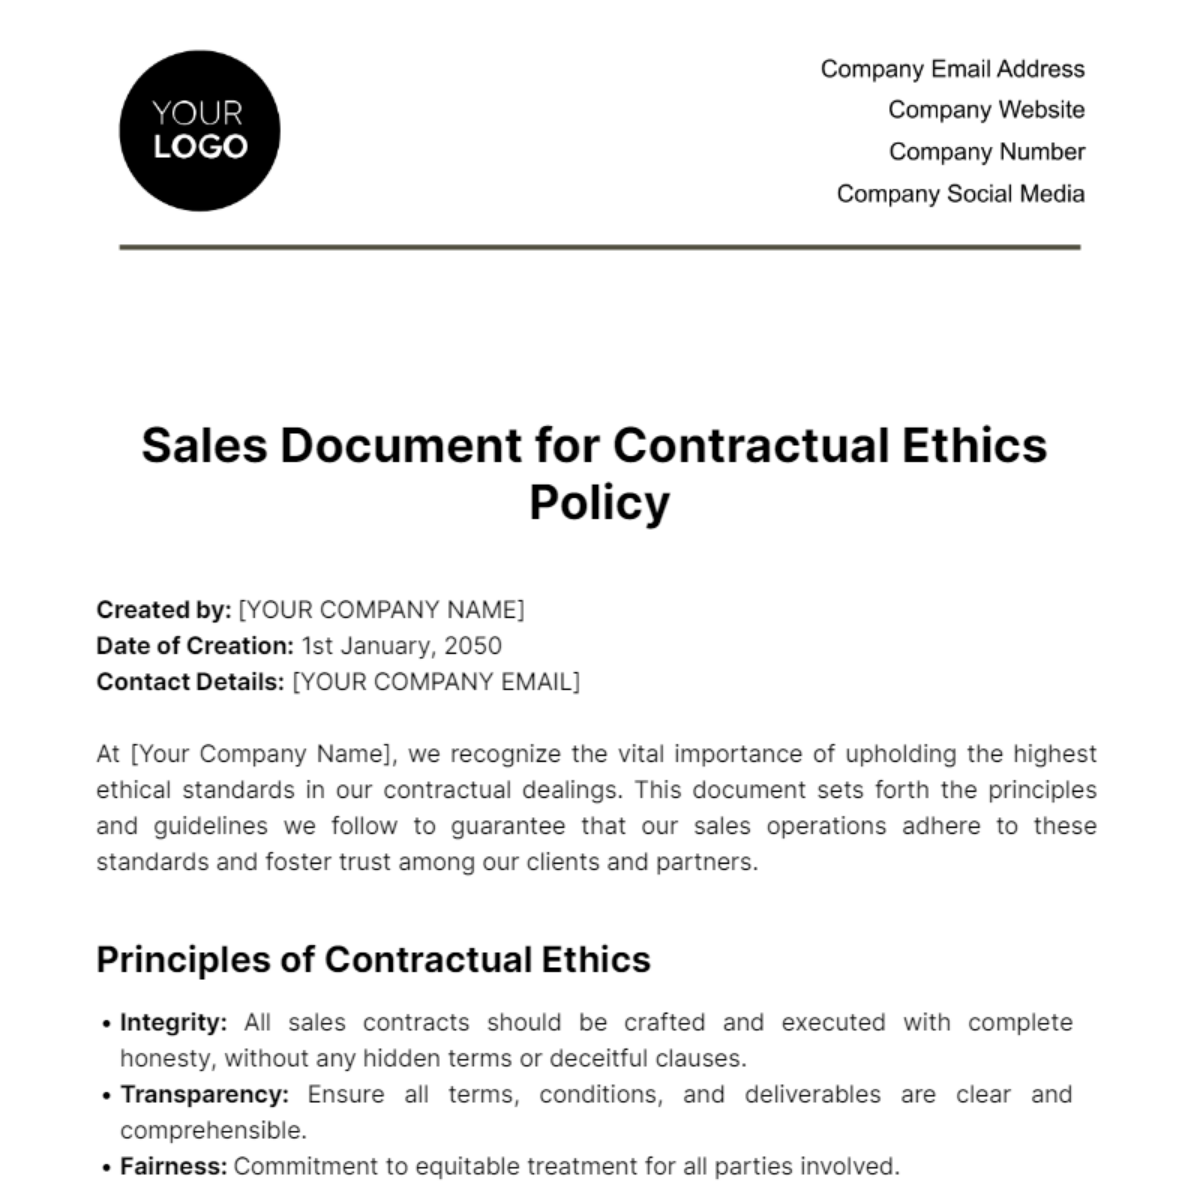 Sales Document for Contractual Ethics Template